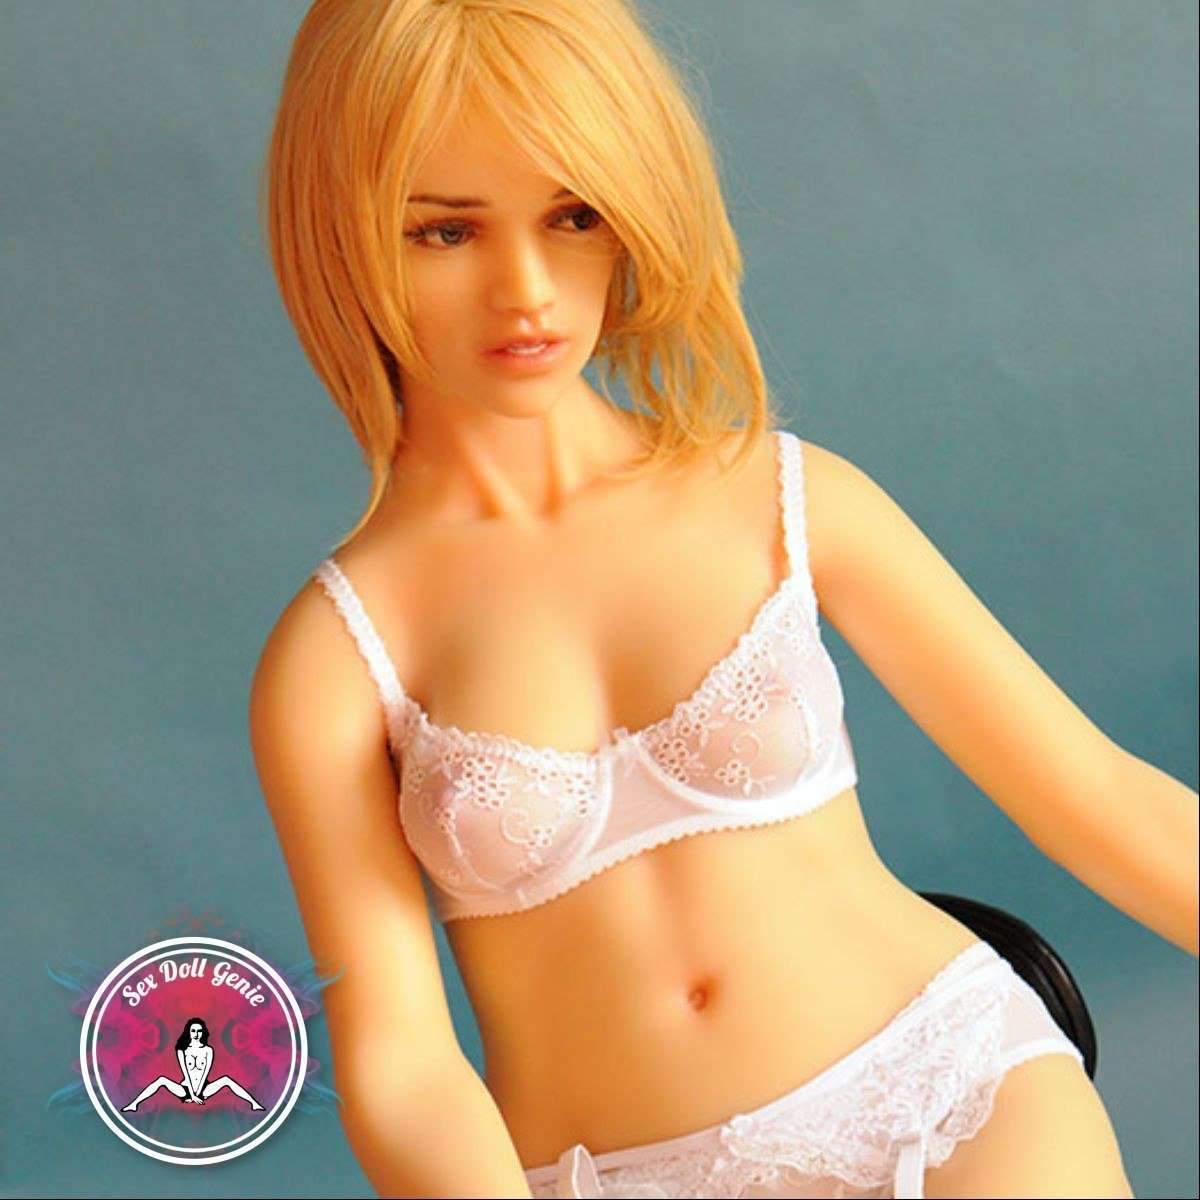 DS Doll - 158cm - Mandy Head - Type 1 D Cup Silicone Doll-20